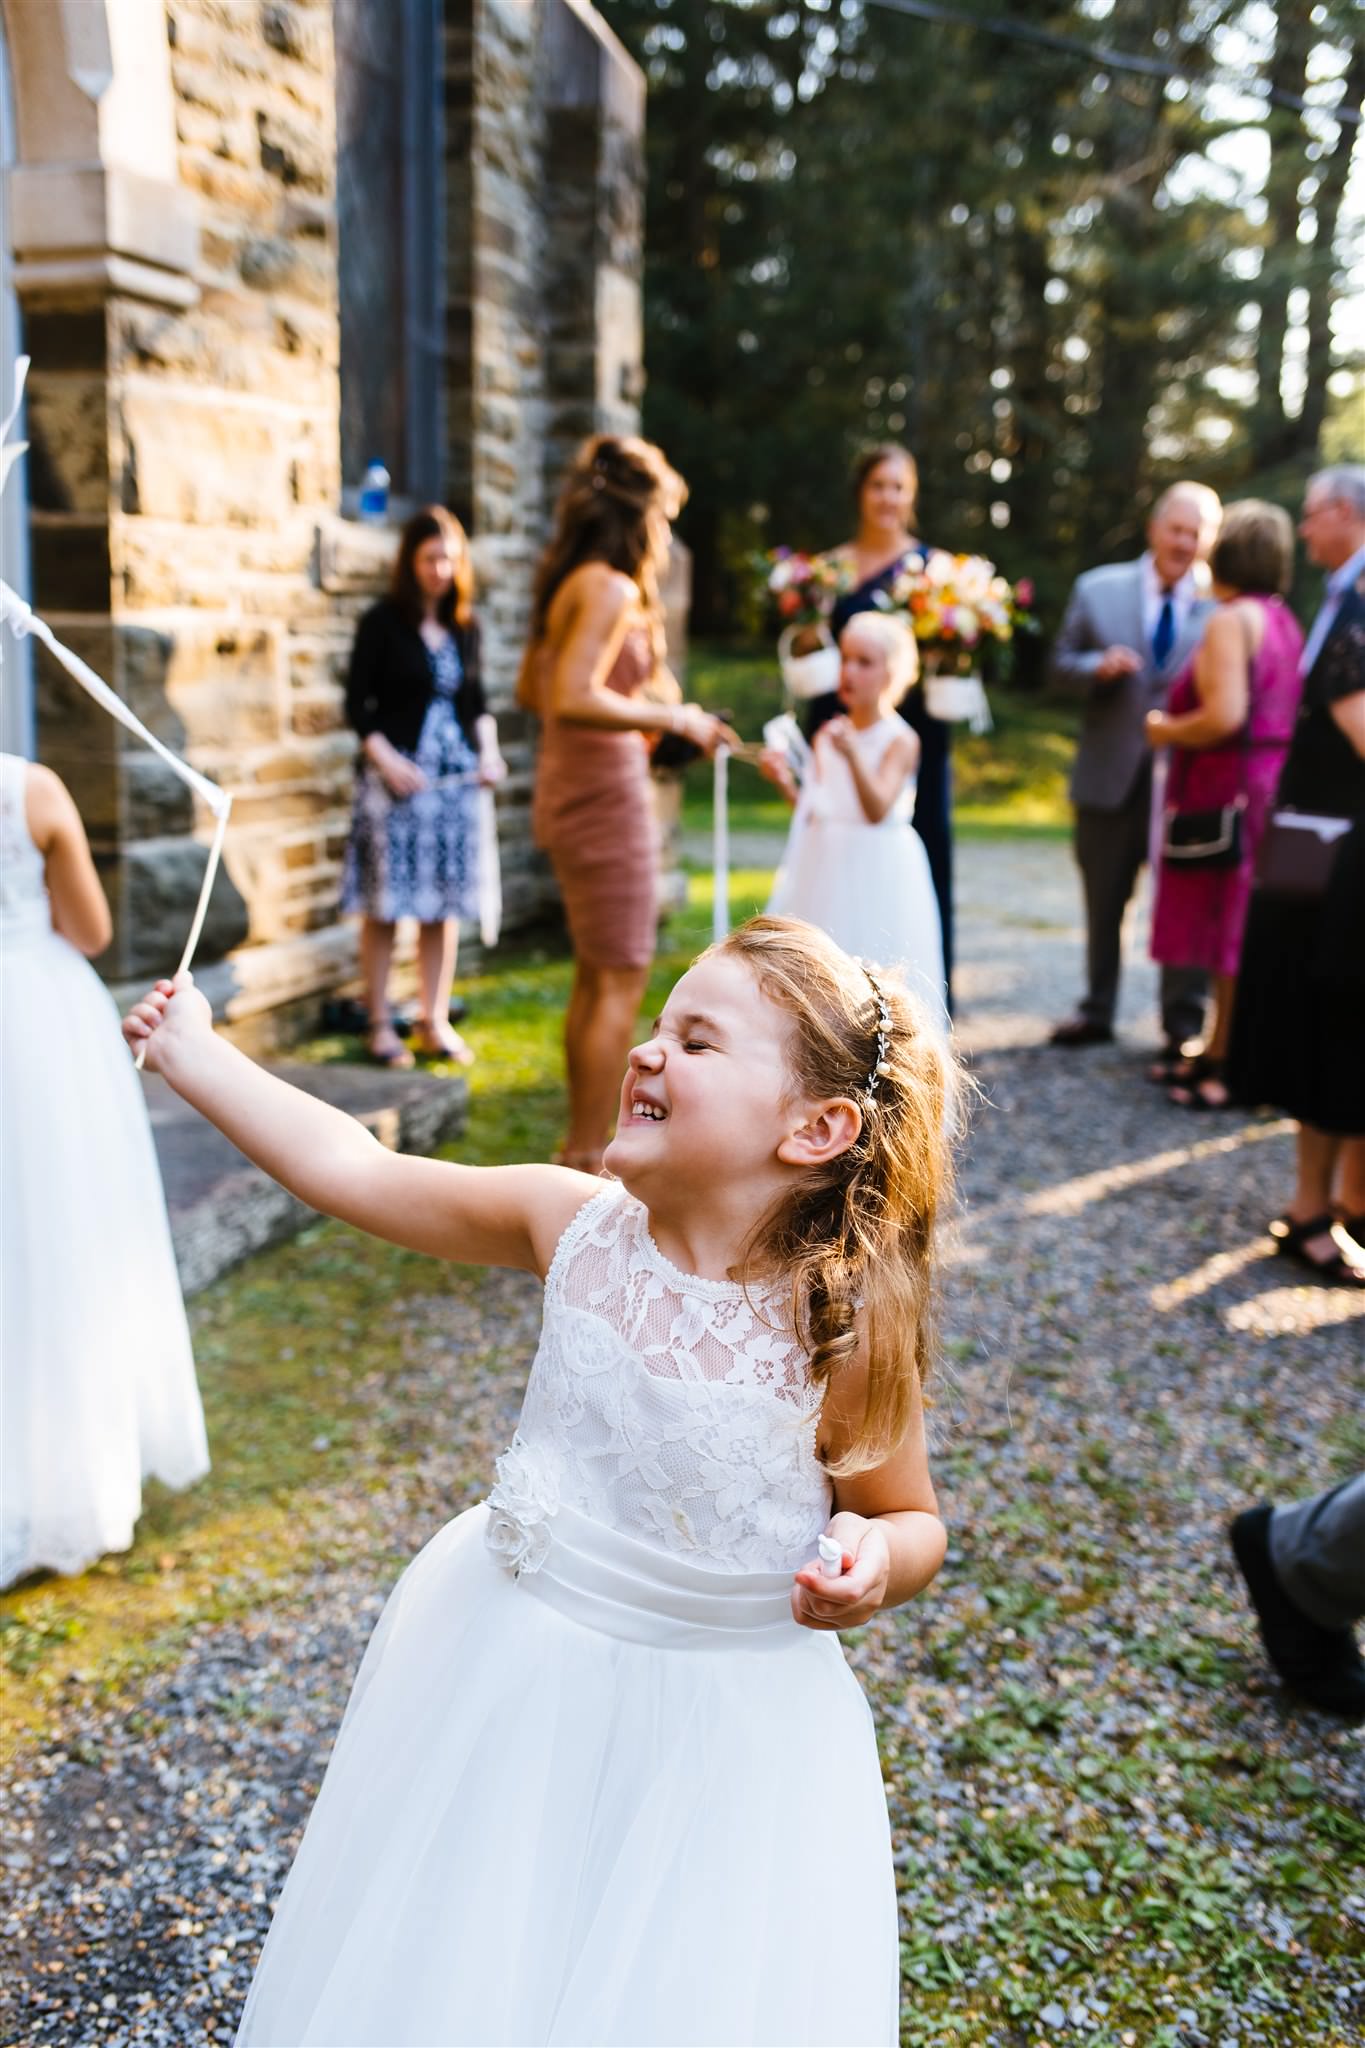 The flower girl waves a flag with glee after the wedding ceremony.